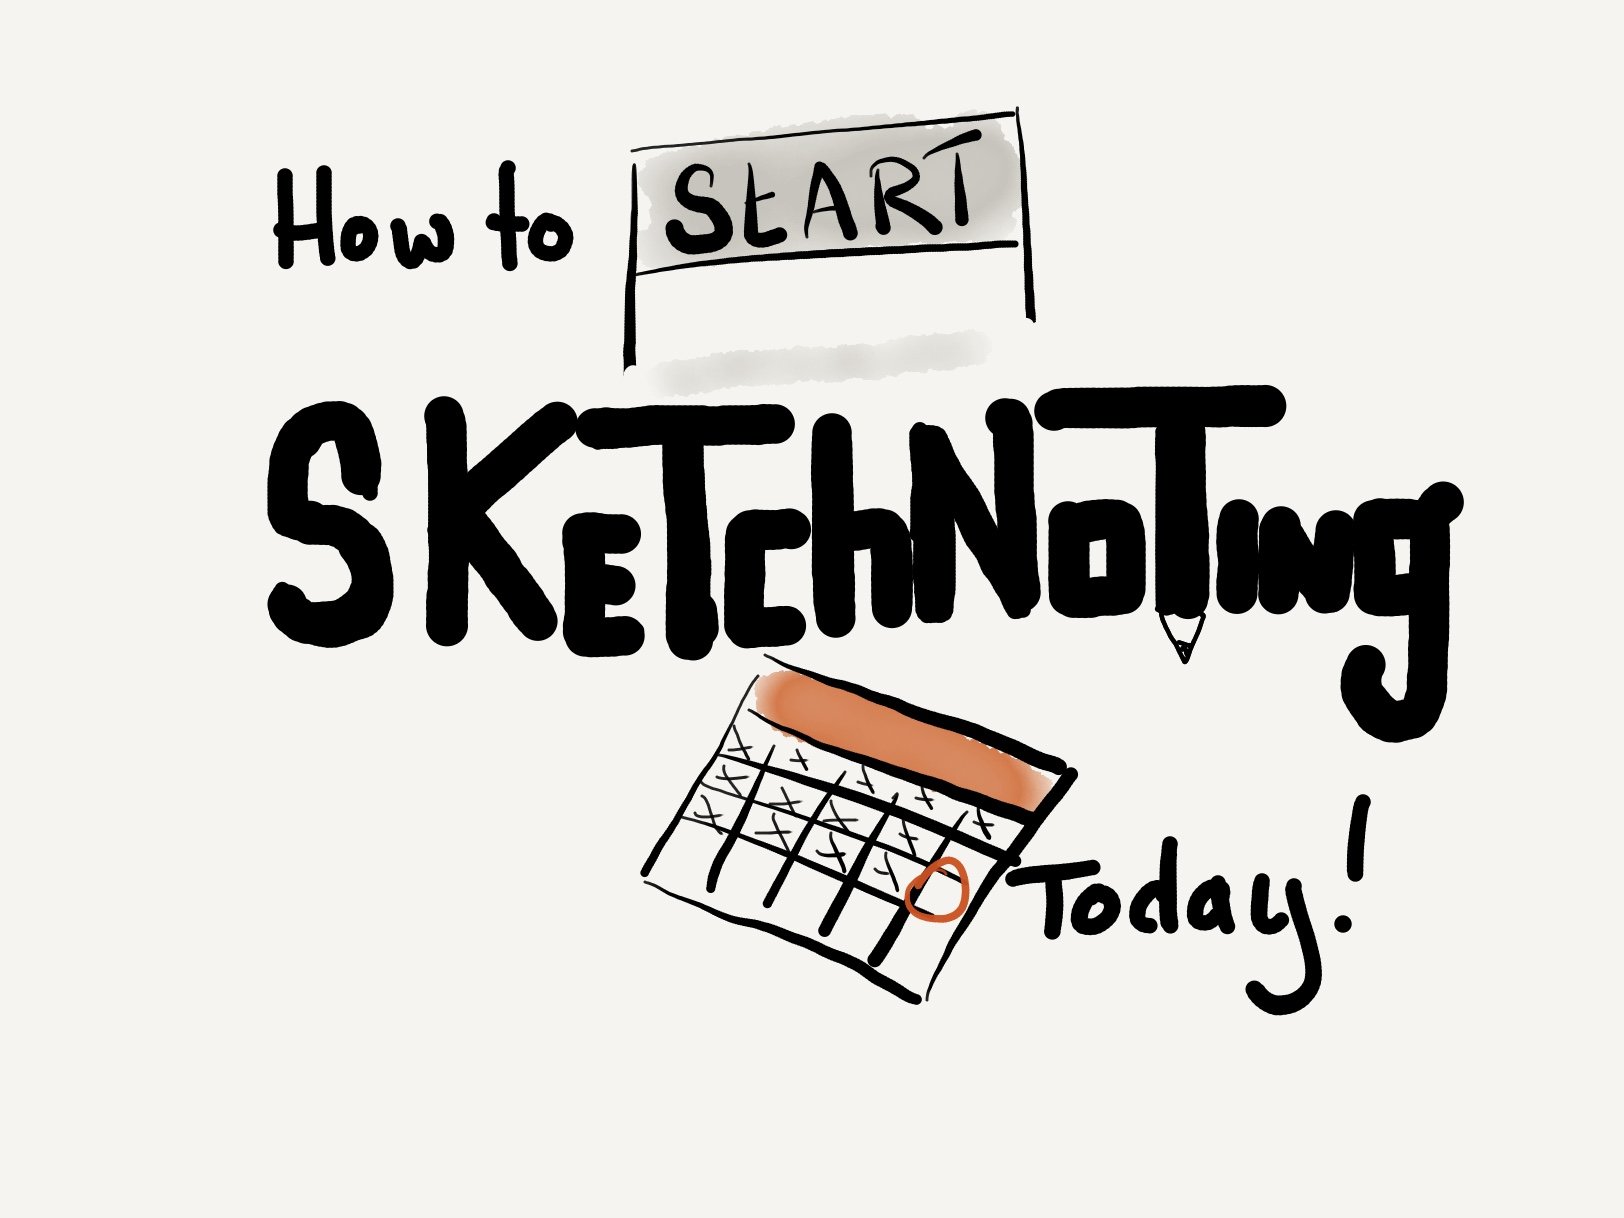 How to Start Sketchnoting today